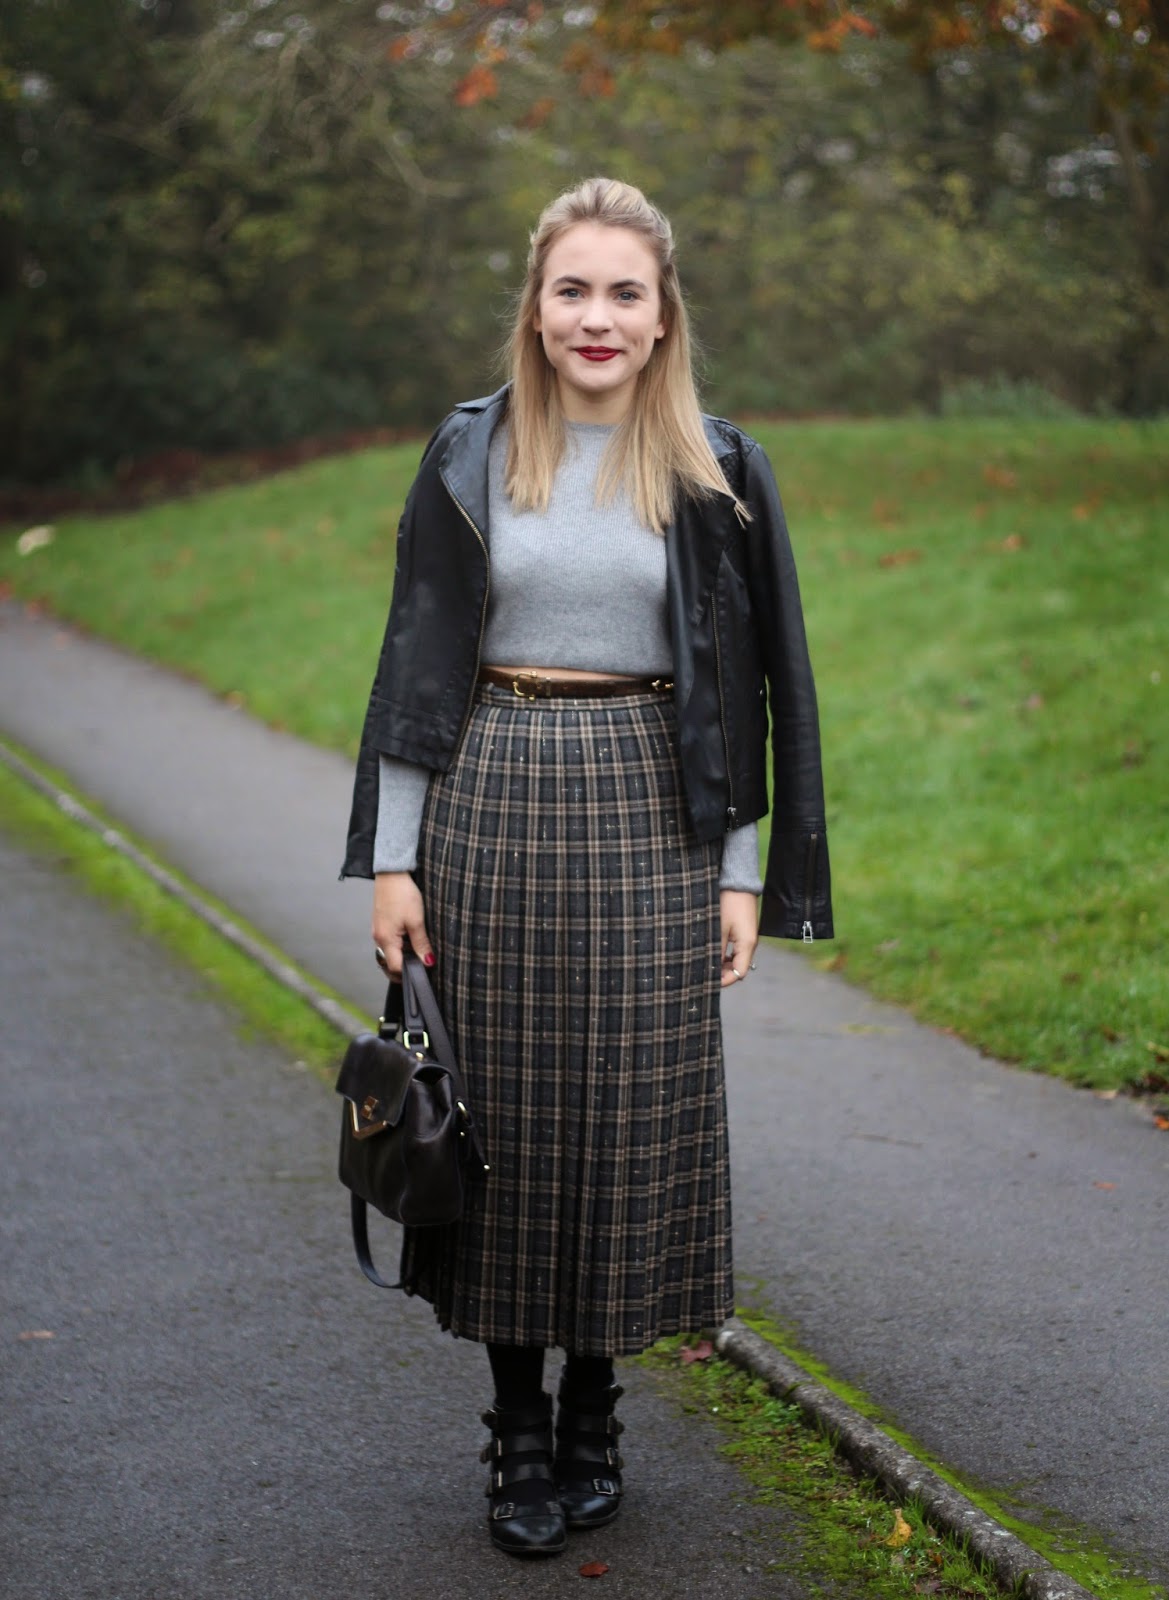 Paloma in Disguise: The one with the Autumn skirt